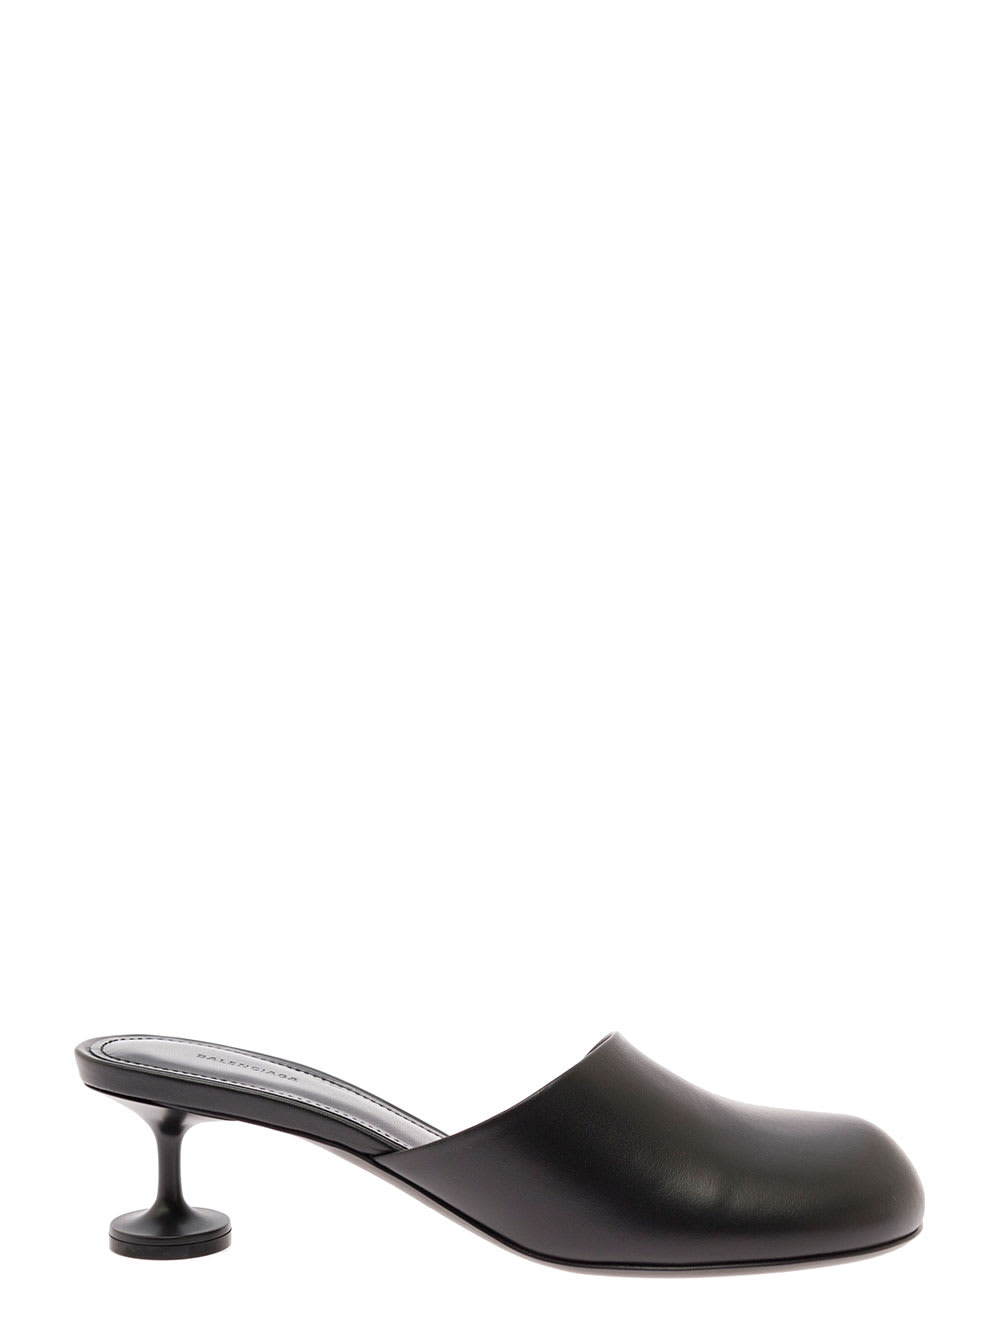 Black Lady Mule In Leather With Champagne Heel Balenciaga Woman